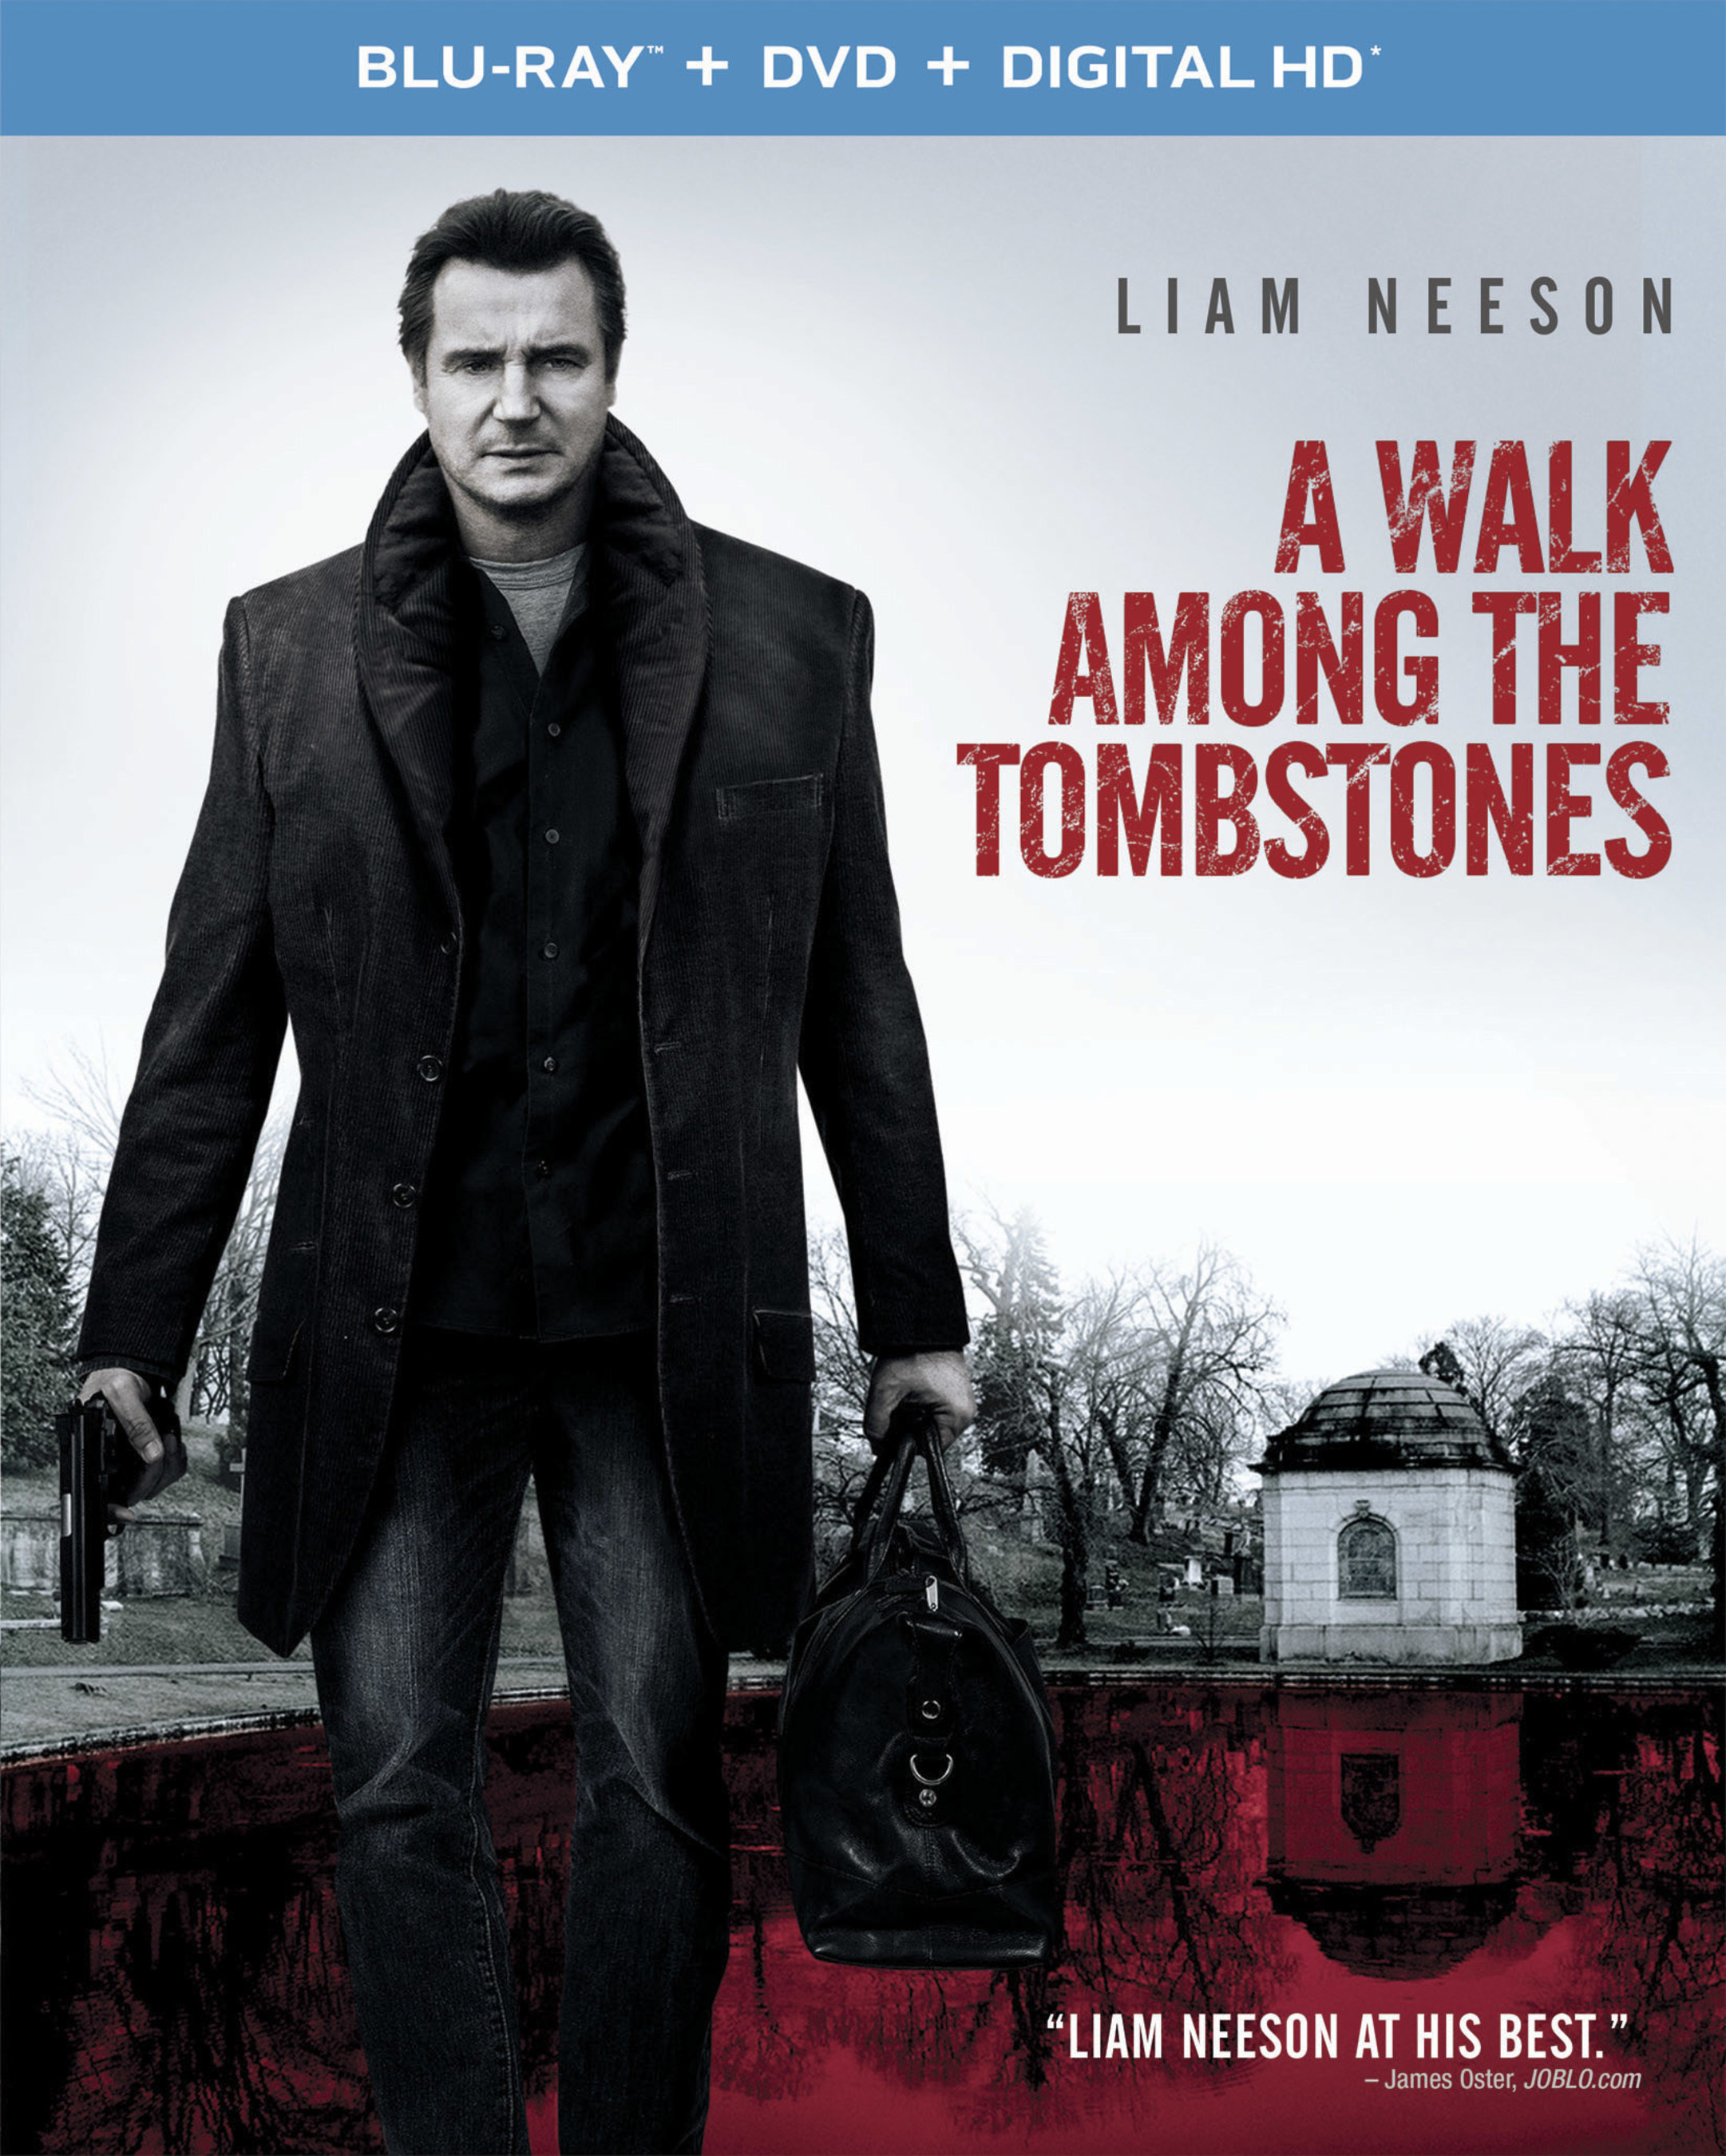 FROM UNIVERSAL PICTURES HOME ENTERTAINMENT: A WALK AMONG THE TOMBSTONES